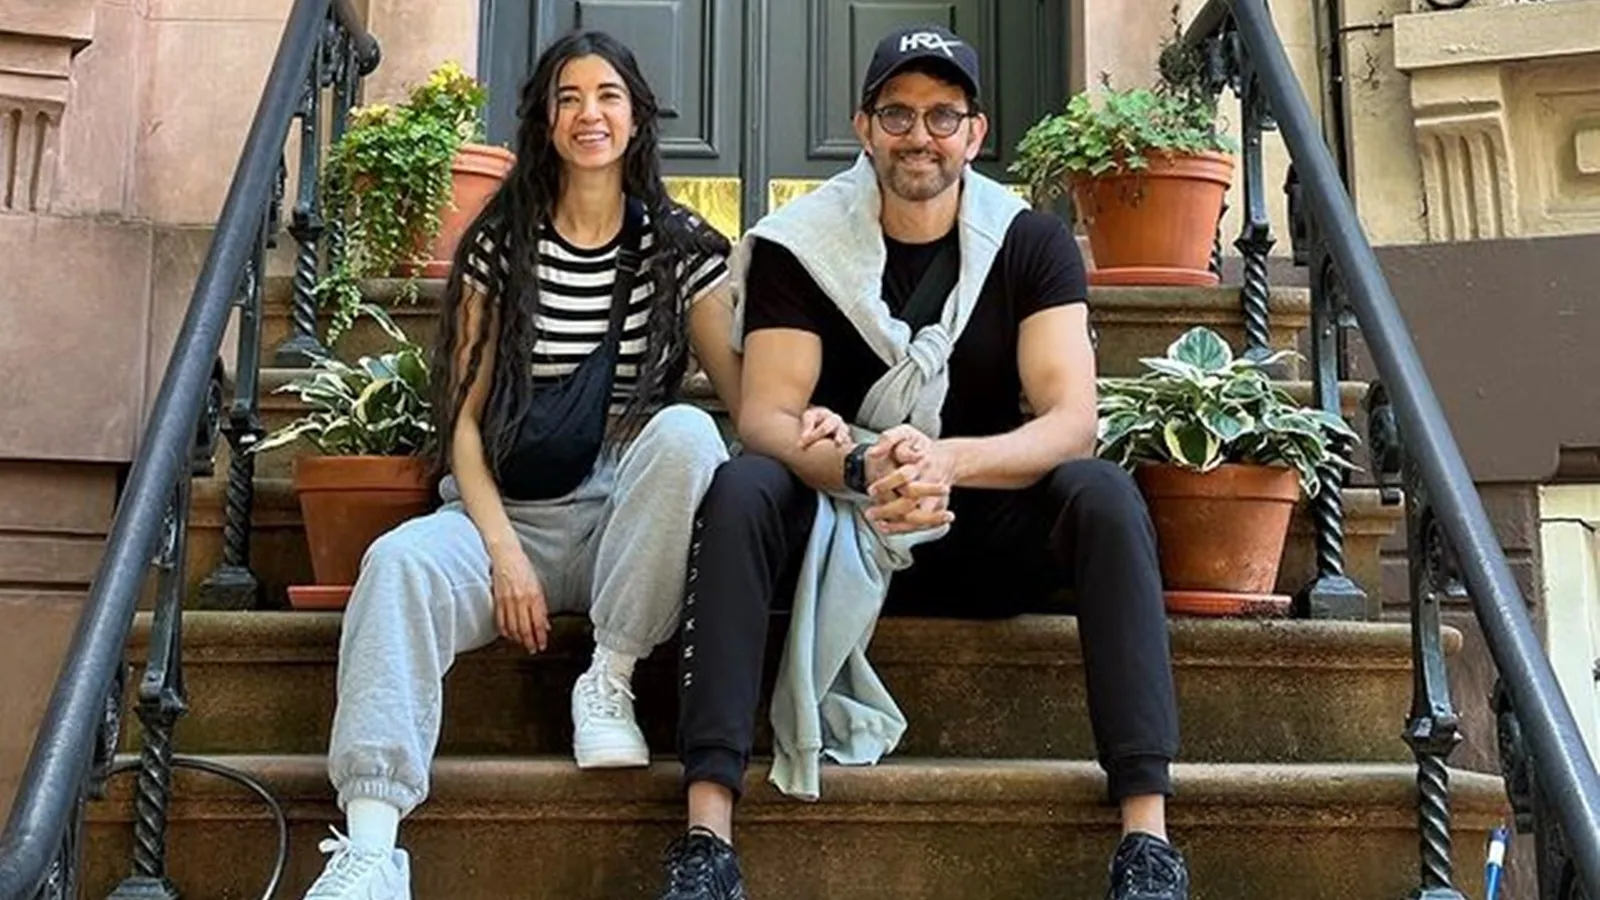 Hrithik Roshan pens note for girlfriend Saba Azad on her 38th birthday: 'It  feels like home with you'. See photo